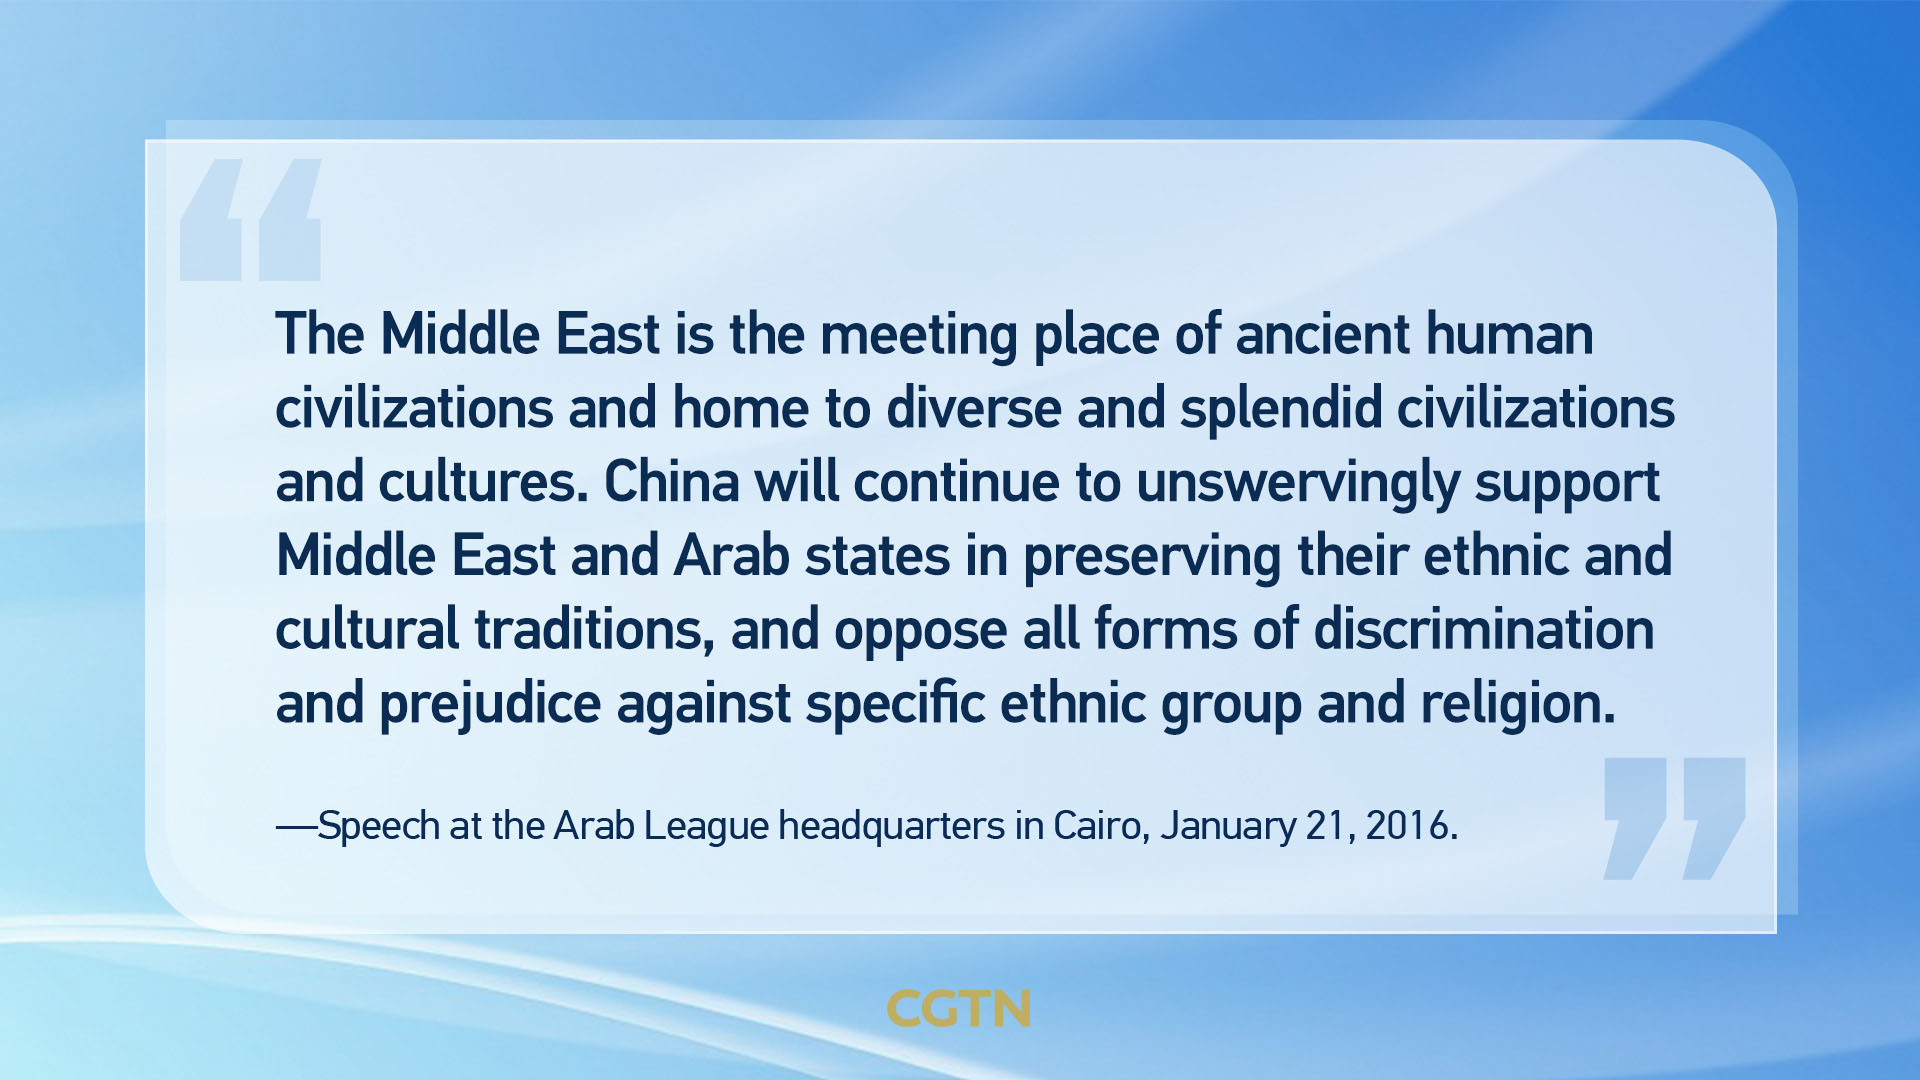 Key quotes from Xi Jinping's remarks on China-Arab friendship